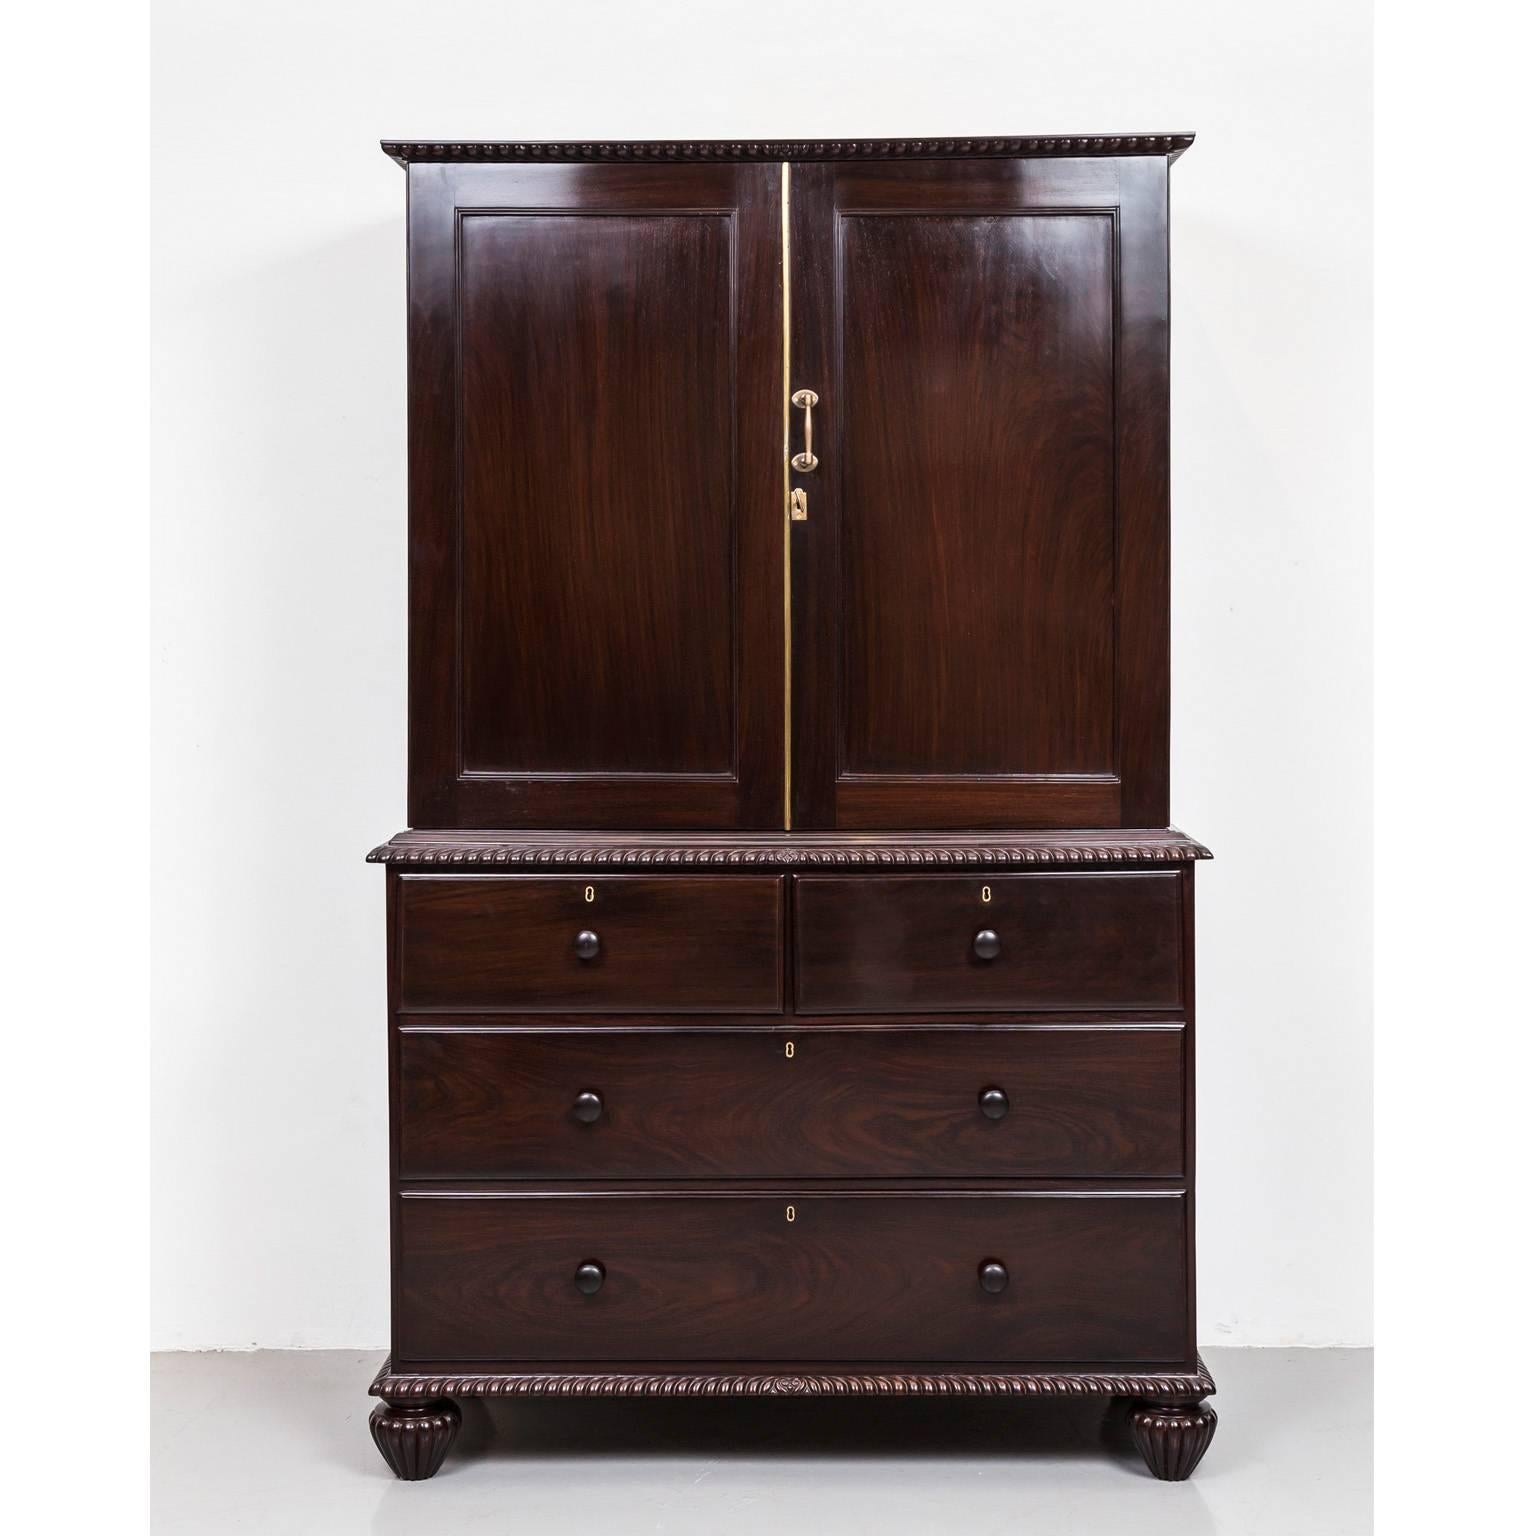 A top quality British colonial cupboard made of rosewood. The upper section has a flat top with egg and dart carving on the frieze and paneled doors. 
The interior in mahogany and is fitted with three sliding shelves. The lower part comprises two